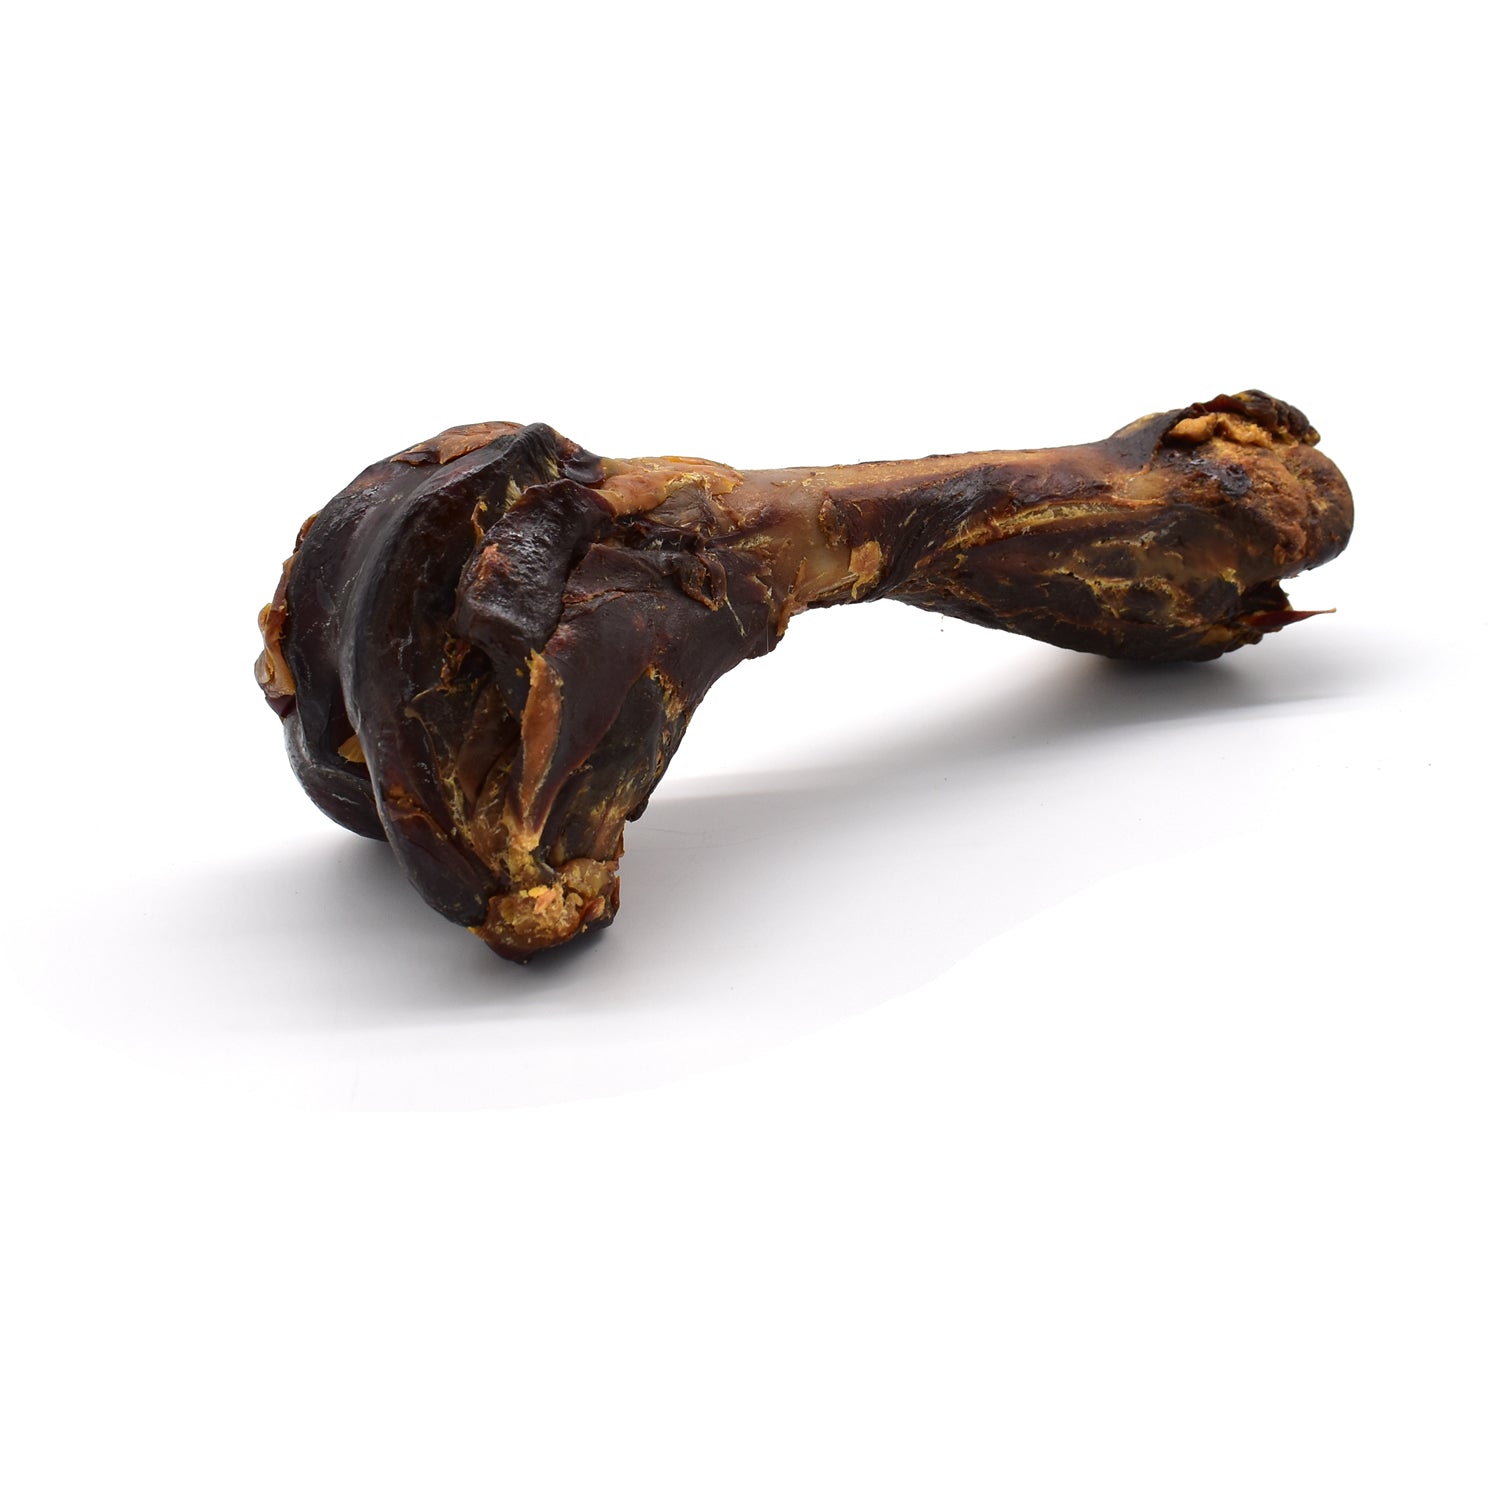 are ham bones good for dogs to chew